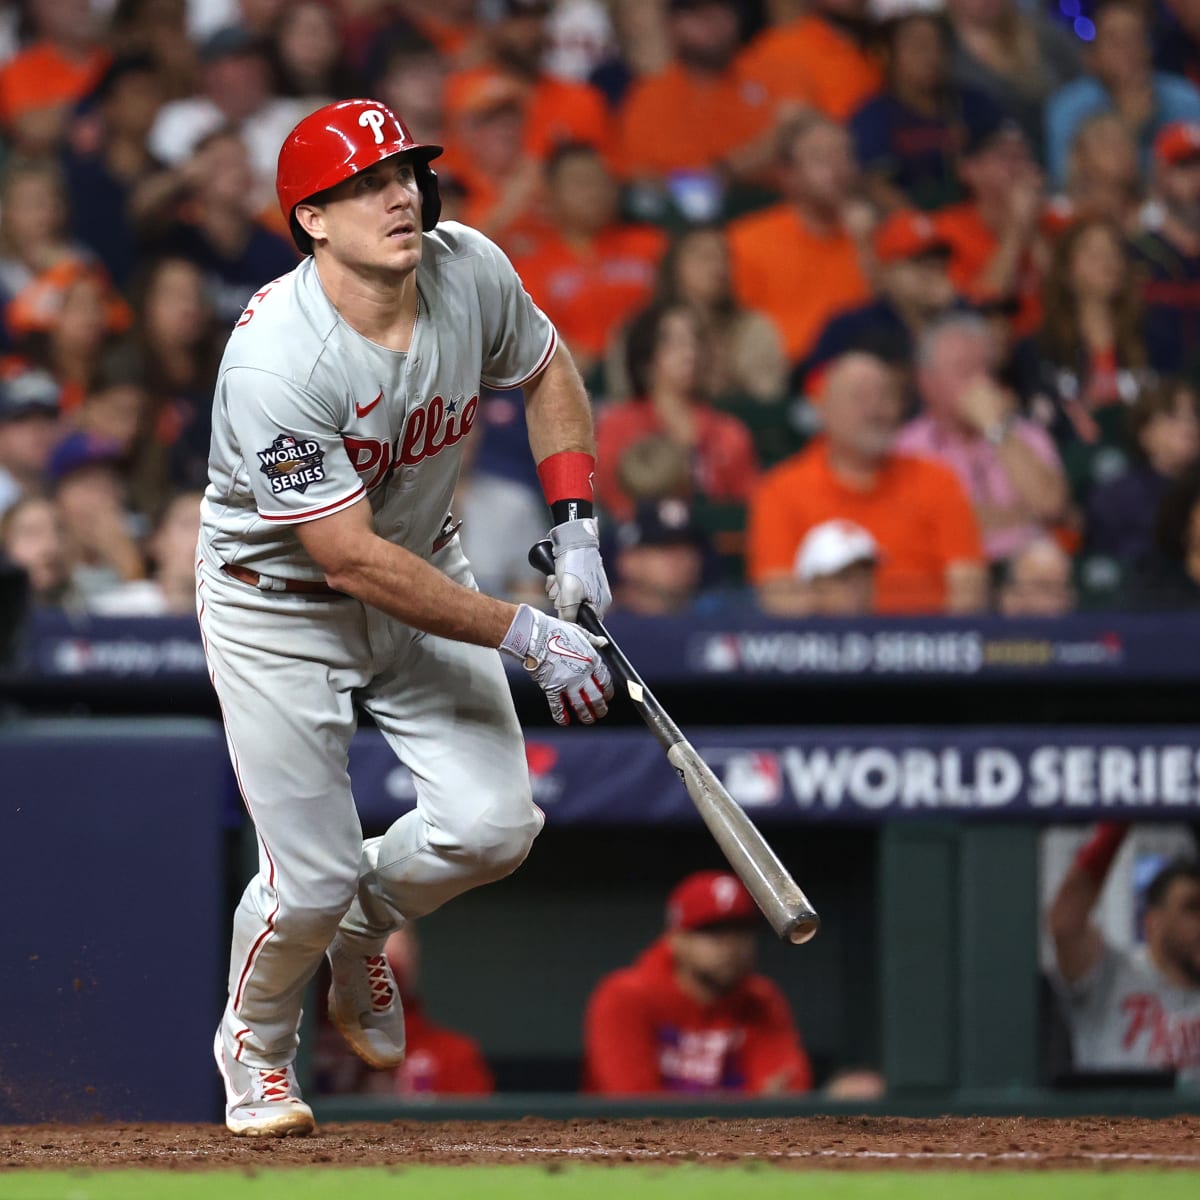 Here's how to vote for J.T. Realmuto for the Platinum Glove Award   Phillies Nation - Your source for Philadelphia Phillies news, opinion,  history, rumors, events, and other fun stuff.